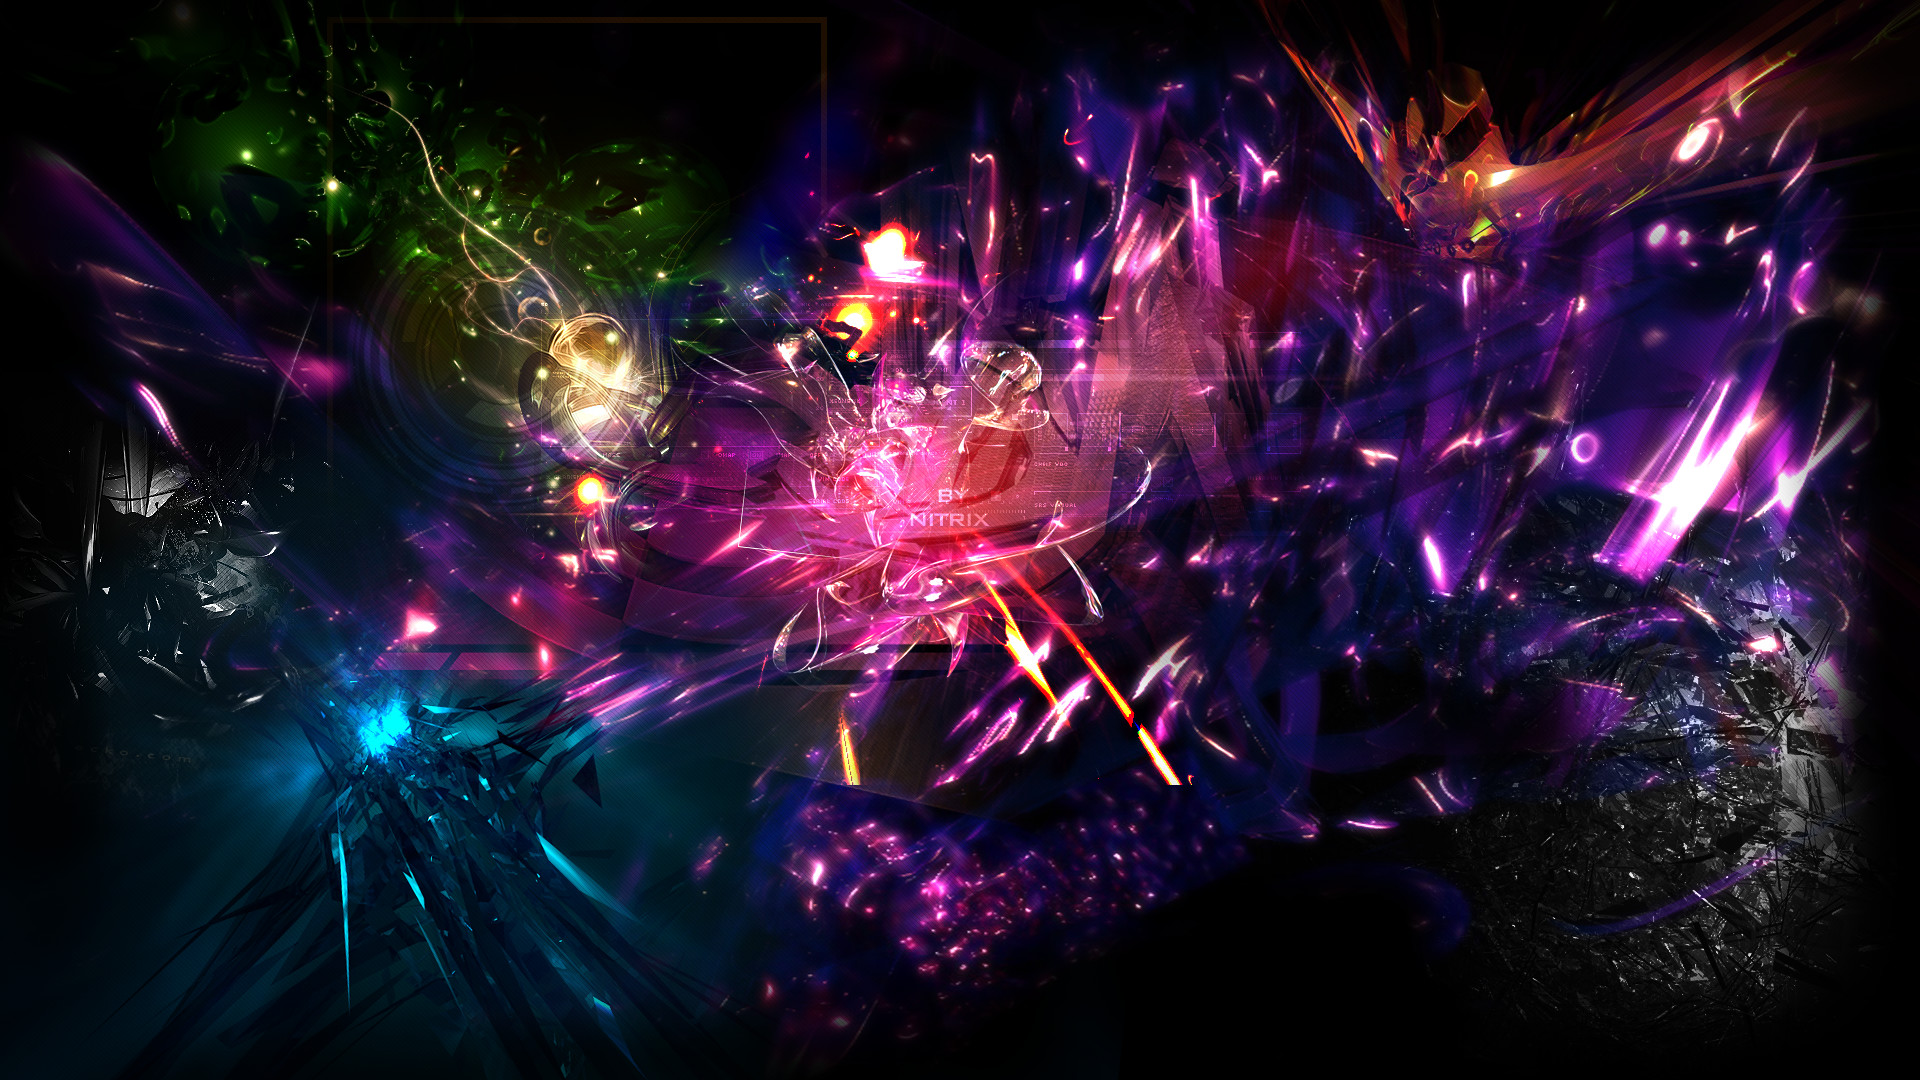 1920x1080 ... Space Abstract Wallpaper (Color Version) by nitr1x